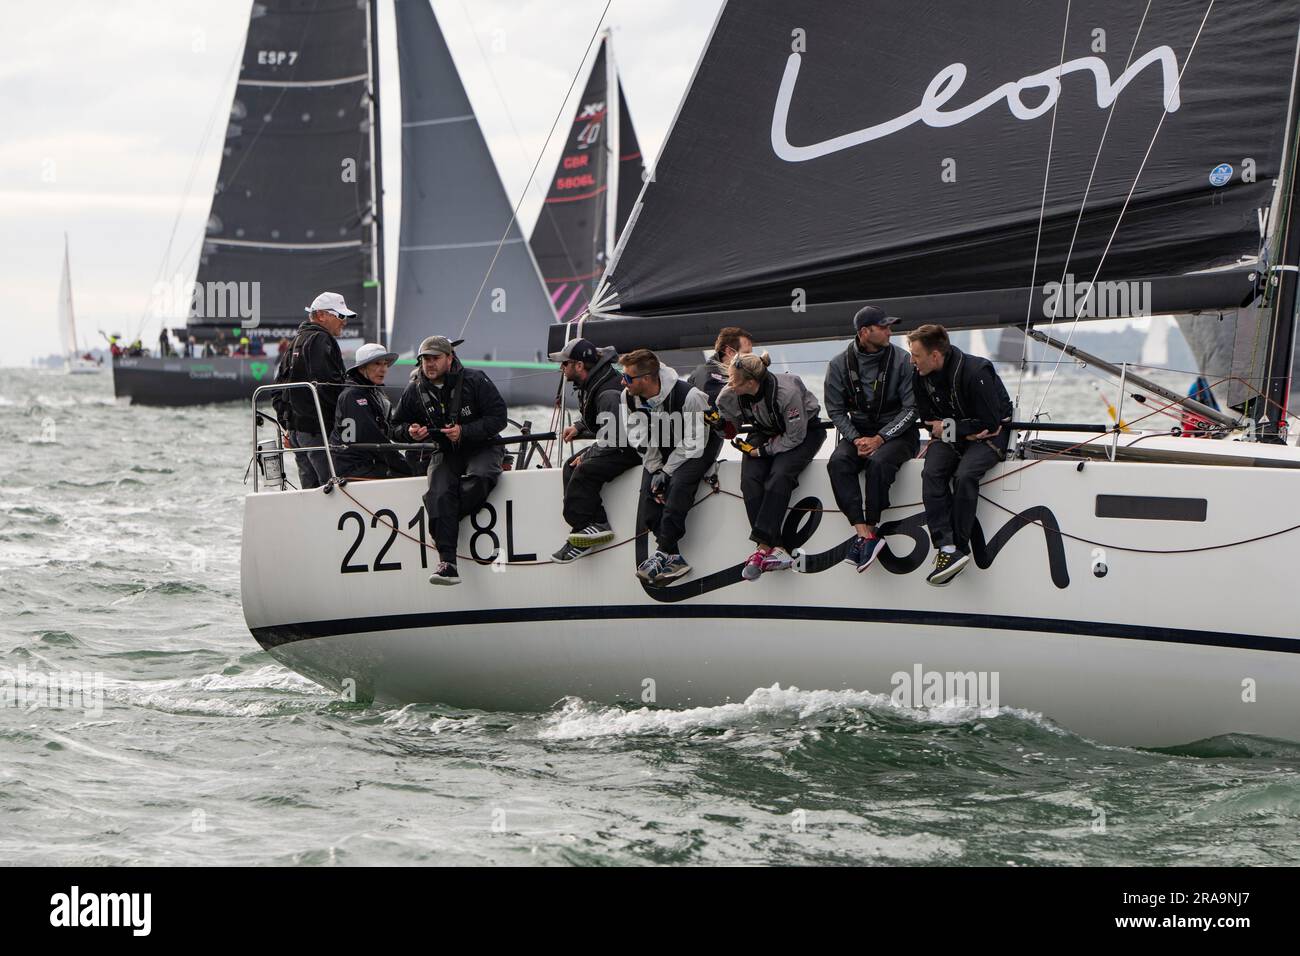 Crew of Sailing Yacht GBR22118L Leon on their way to a class victory at the Isle of Wight Round The Island Sailboat race on the South coast of England Stock Photo